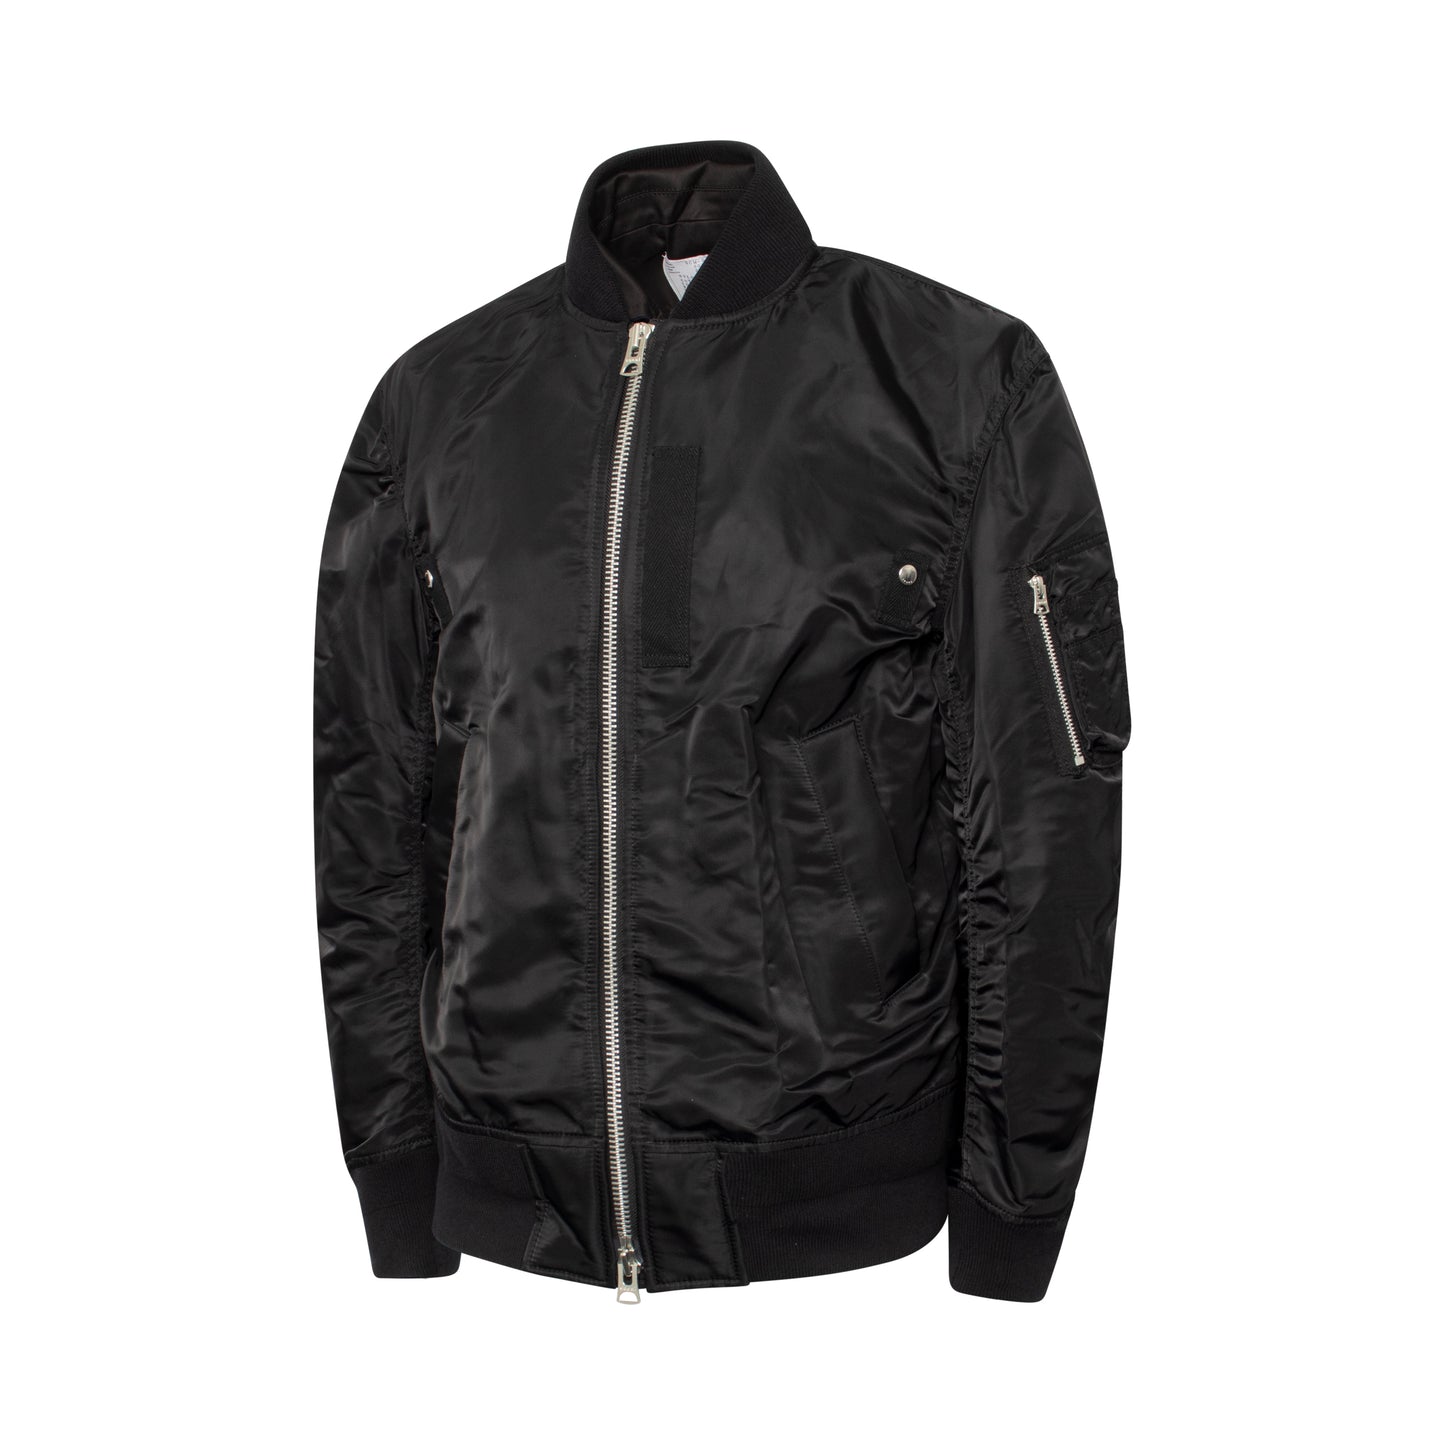 MA-1 Bomber Jackets in Black